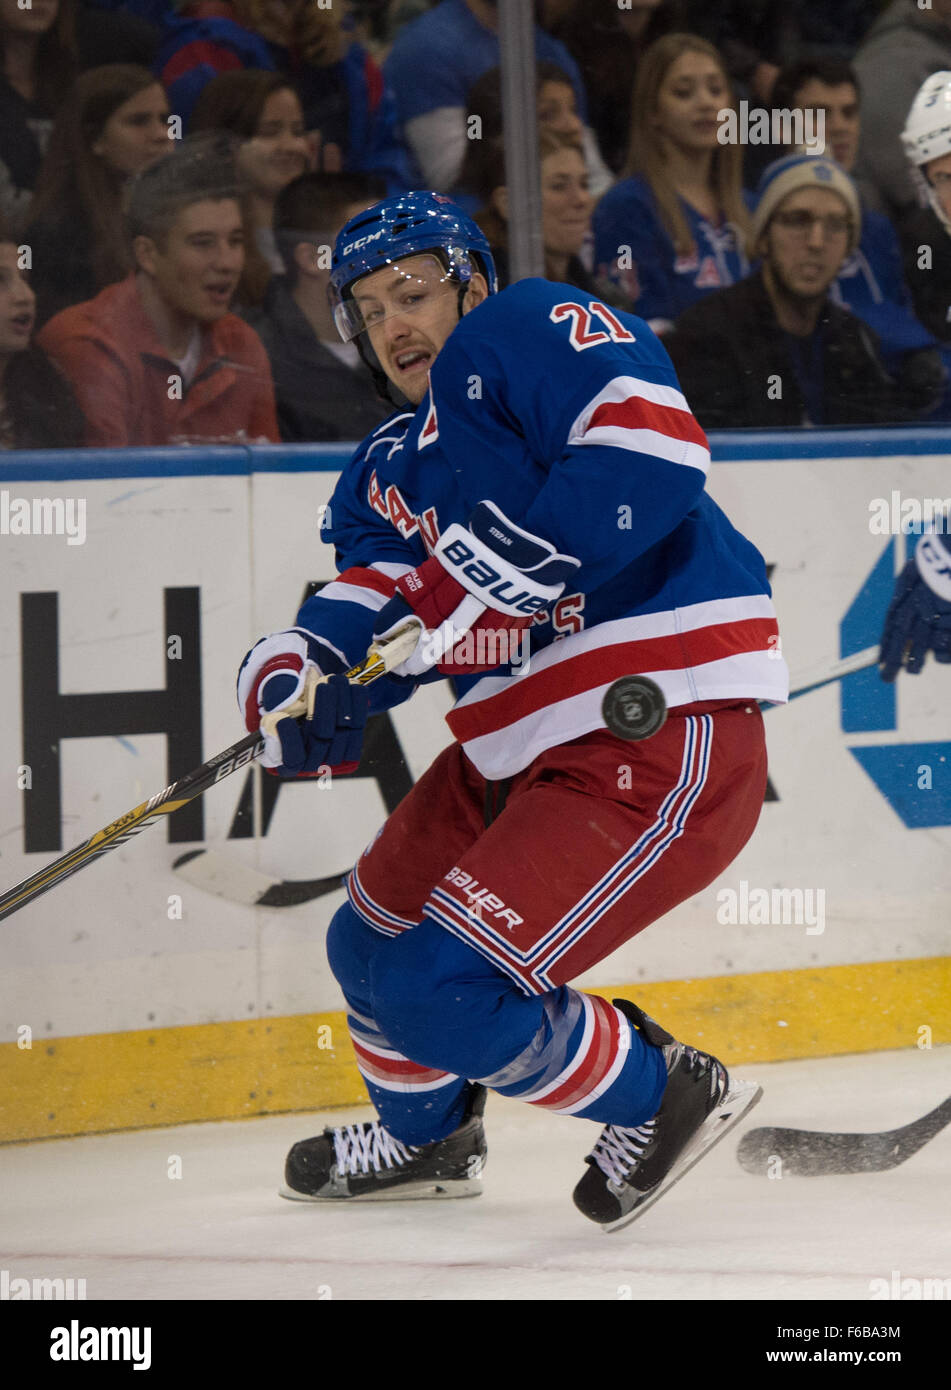 New York, NY, USA. 15th Nov, 2015. New York Rangers center DEREK STEPAN (21) skates for the puck in the 1st period of an NHL hockey game, Madison Square Garden, Sunday, Nov. 15, 2015. Credit:  Bryan Smith/ZUMA Wire/Alamy Live News Stock Photo